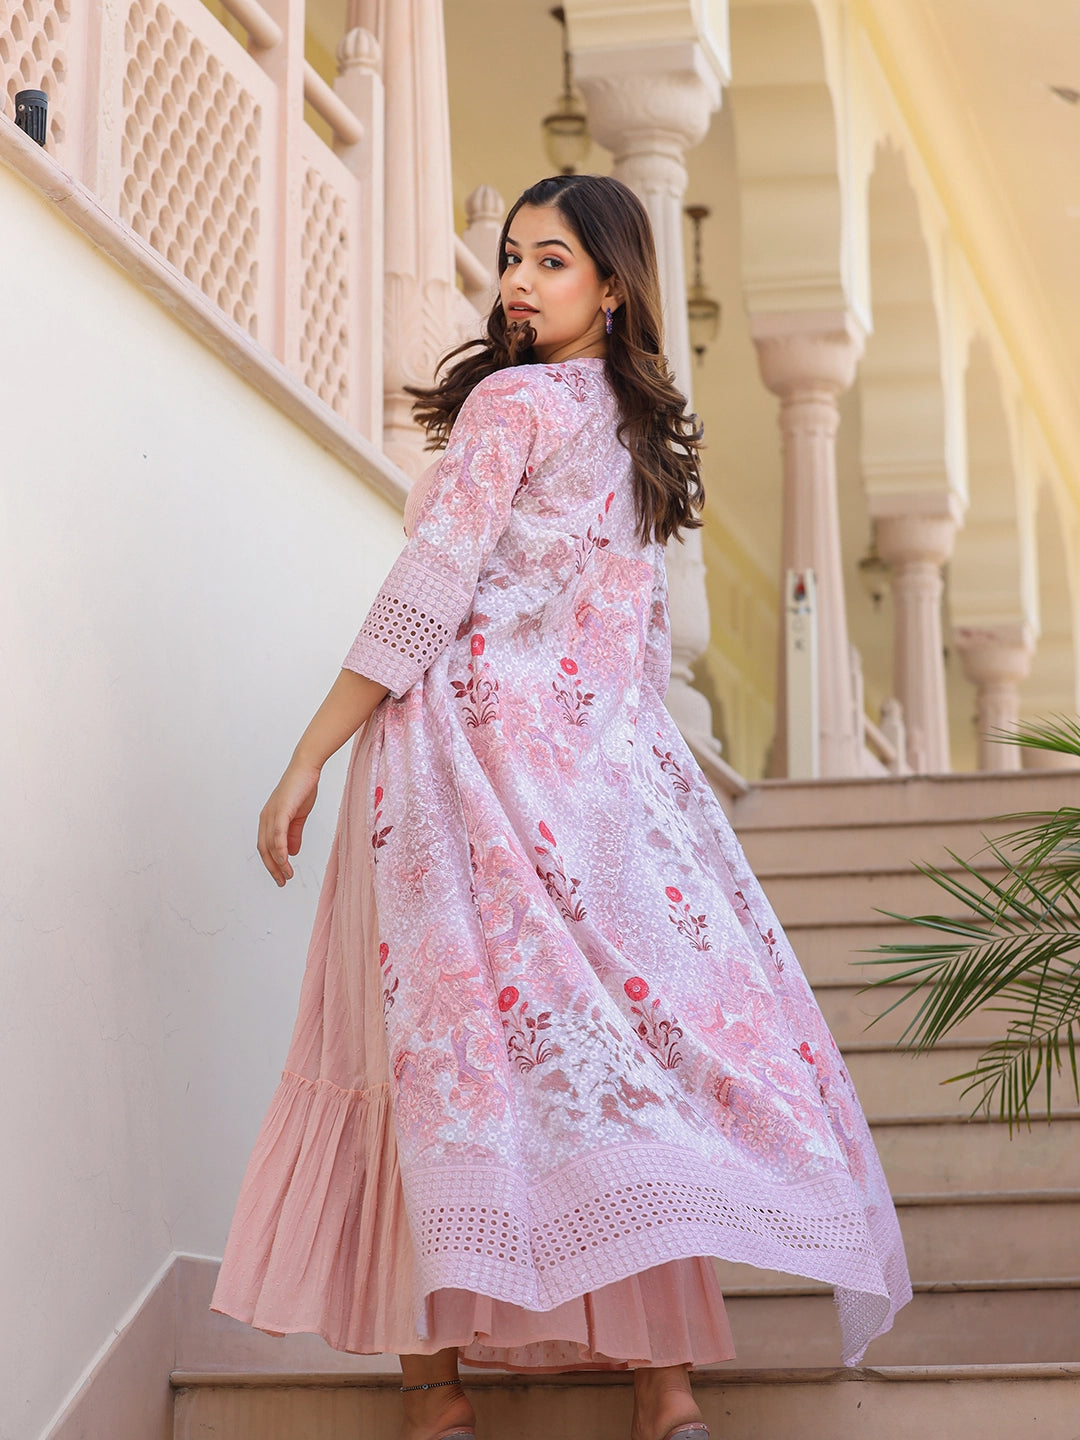 Stunning Pink Long Dress with Matching Shrug for Women